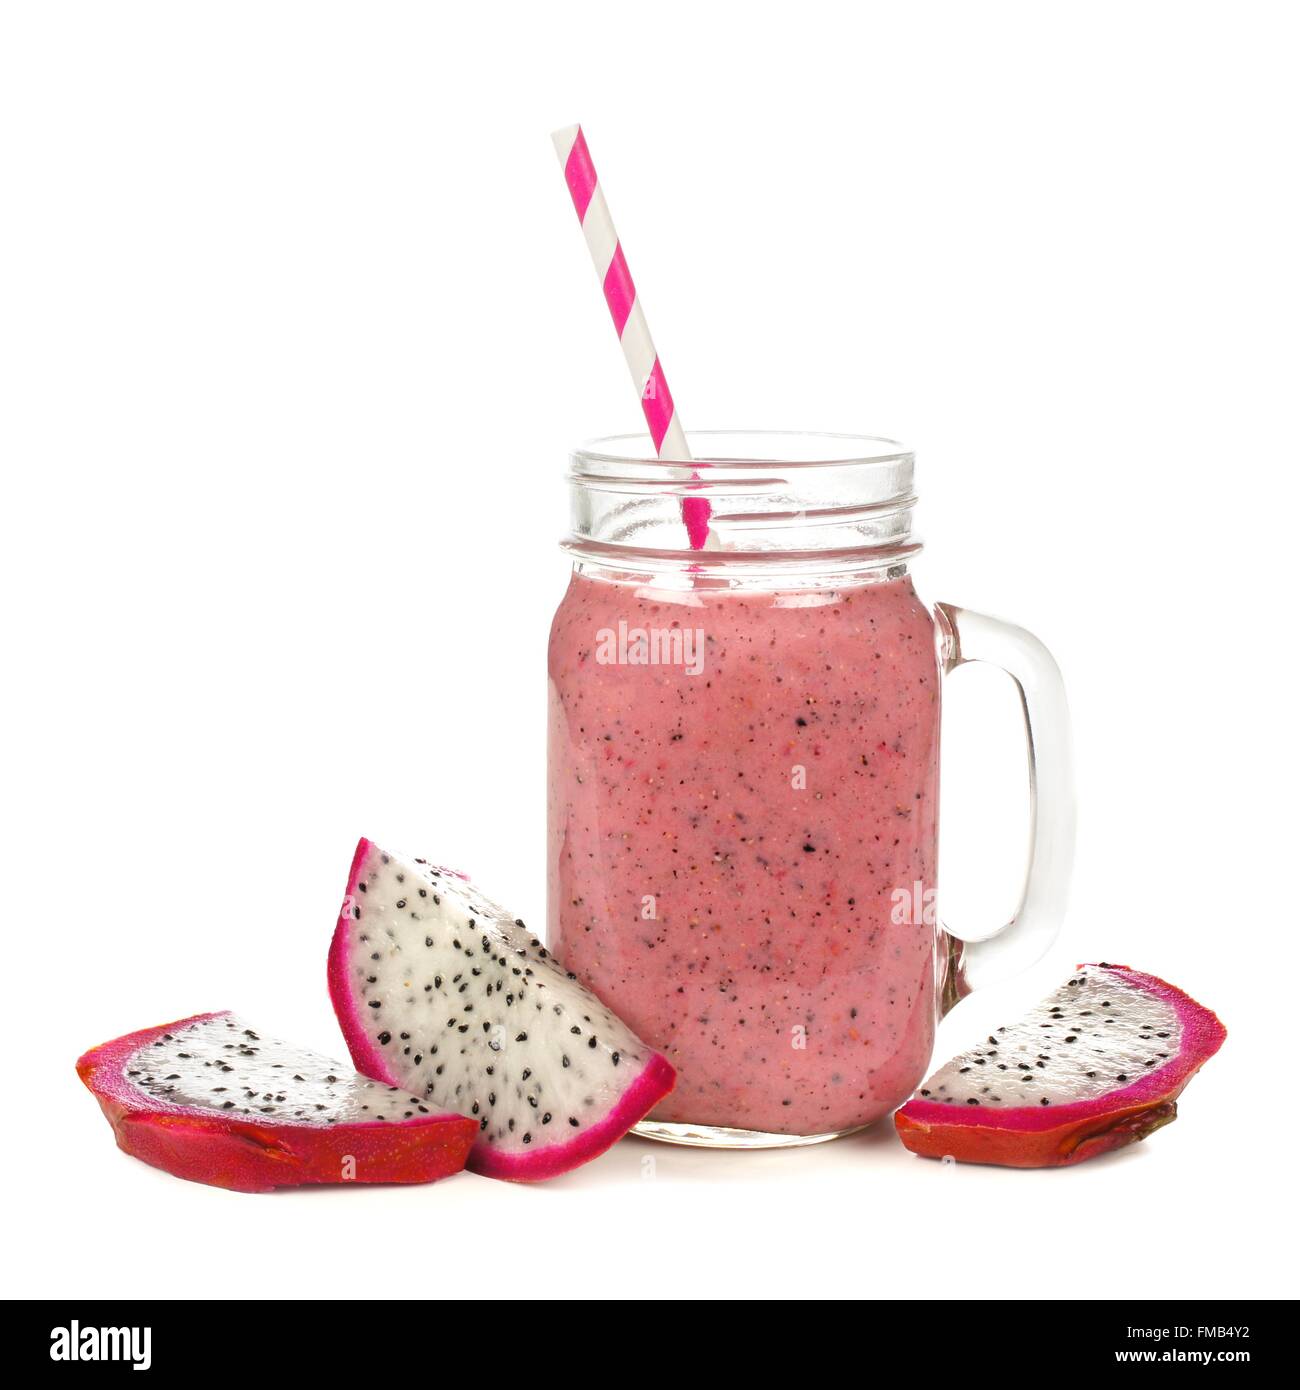 Pink raspberry, dragon fruit smoothie in jar mug with fruit slices isolated on white Stock Photo